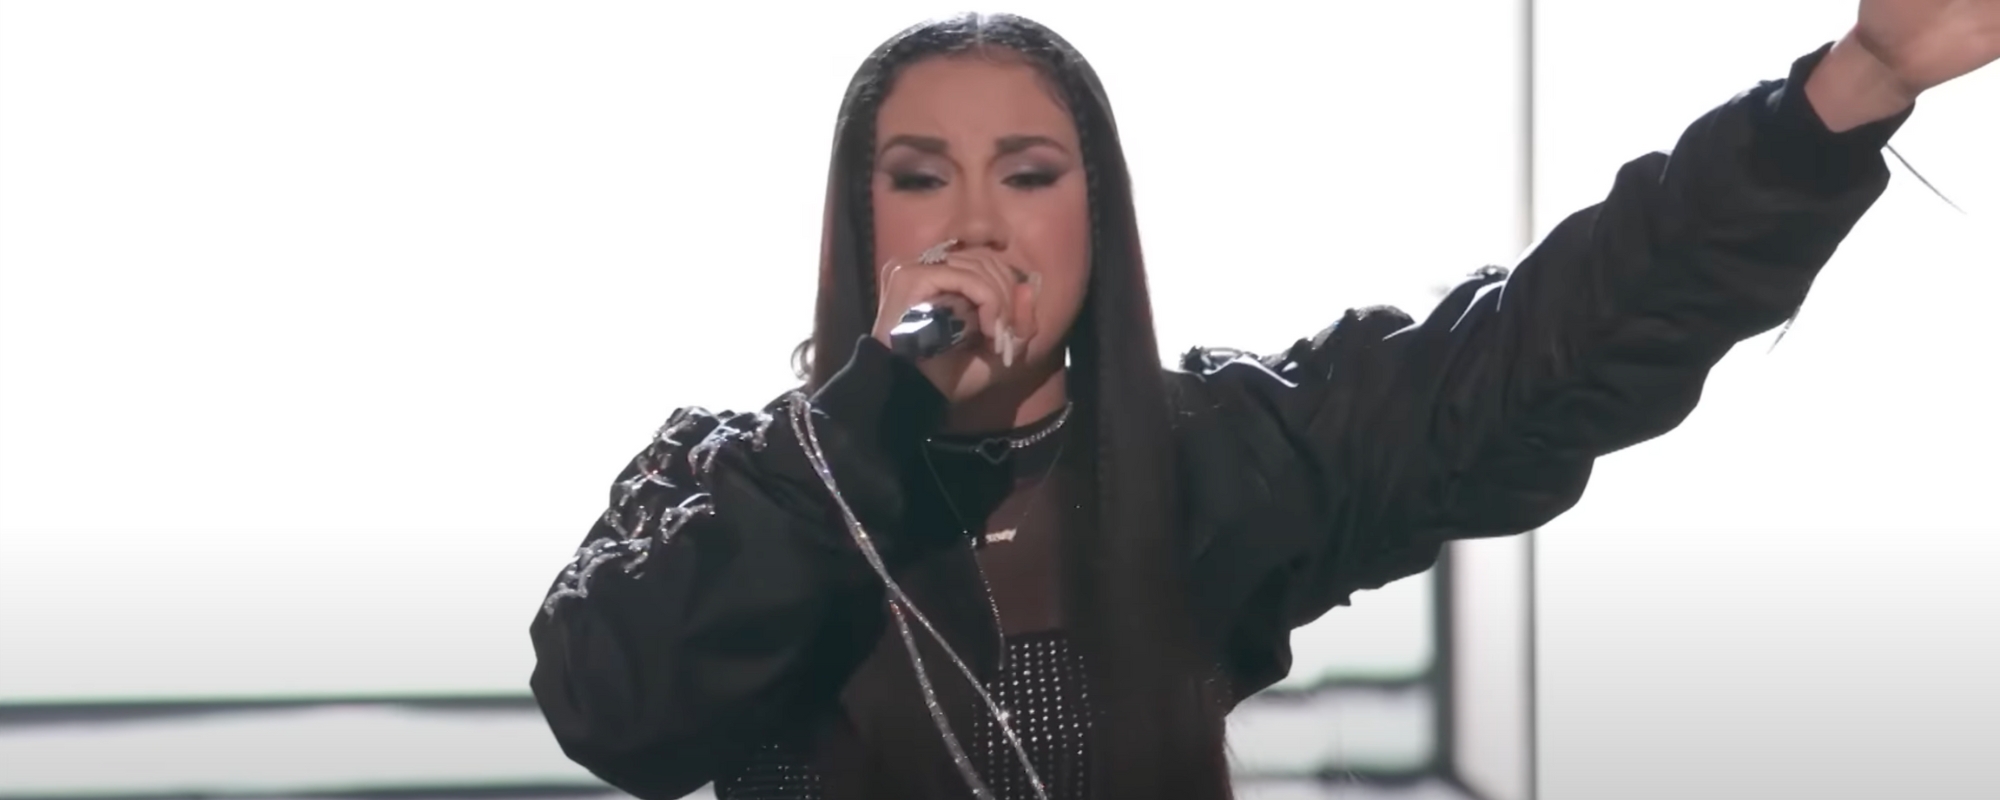 The Voice’s Serenity Arce “Proves She’s a Star in the Making” With Personal Take on Ariana Grande’s “We Can’t Be Friends”